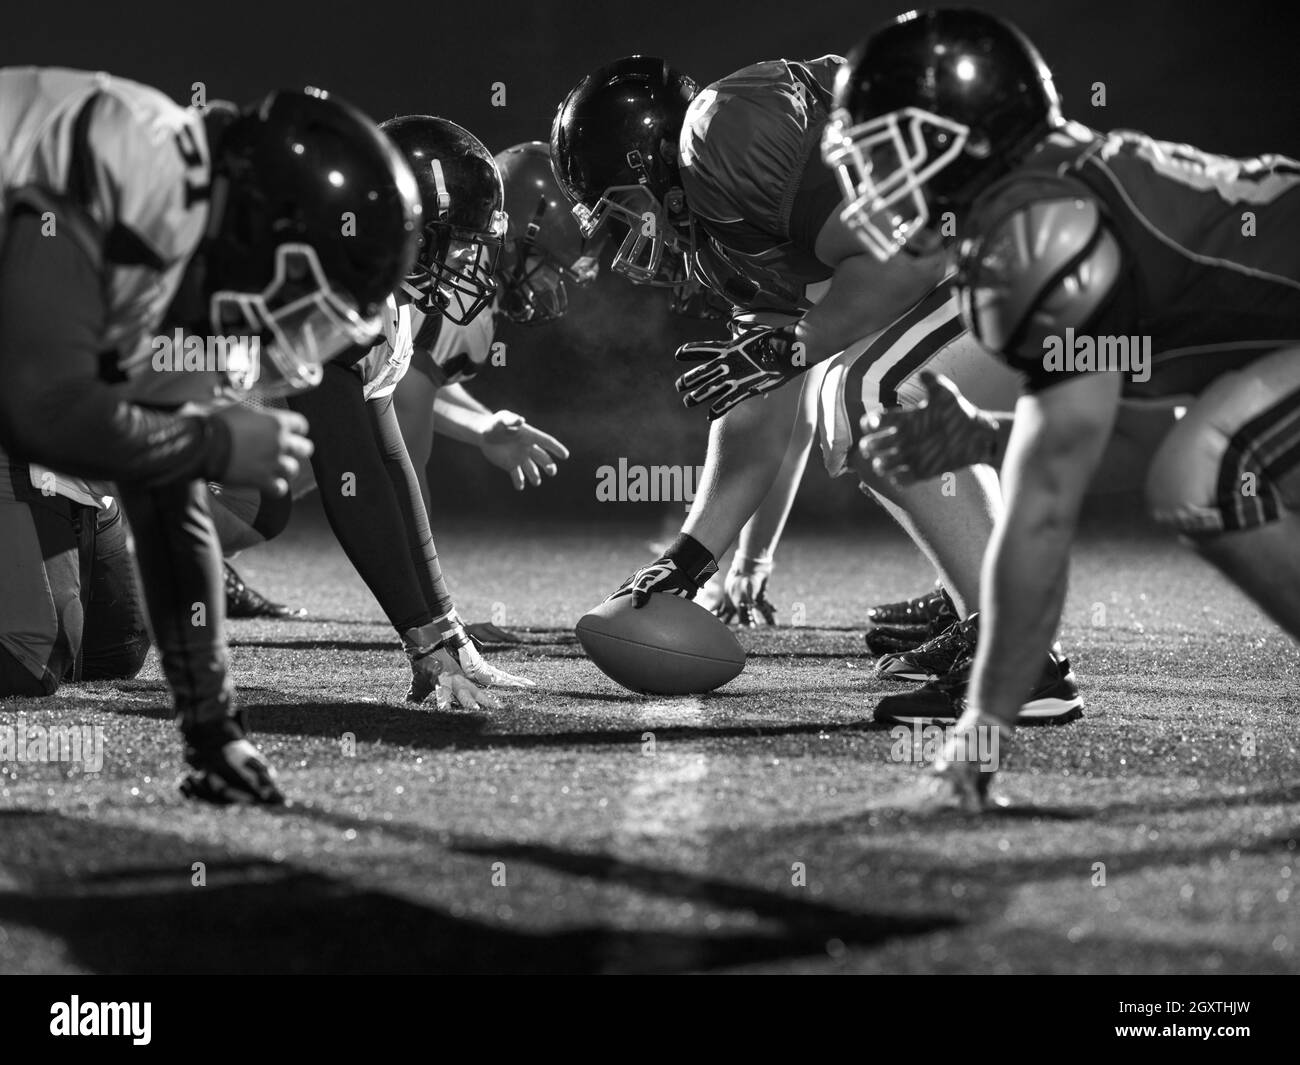 american football players are ready to start on field at night Stock Photo